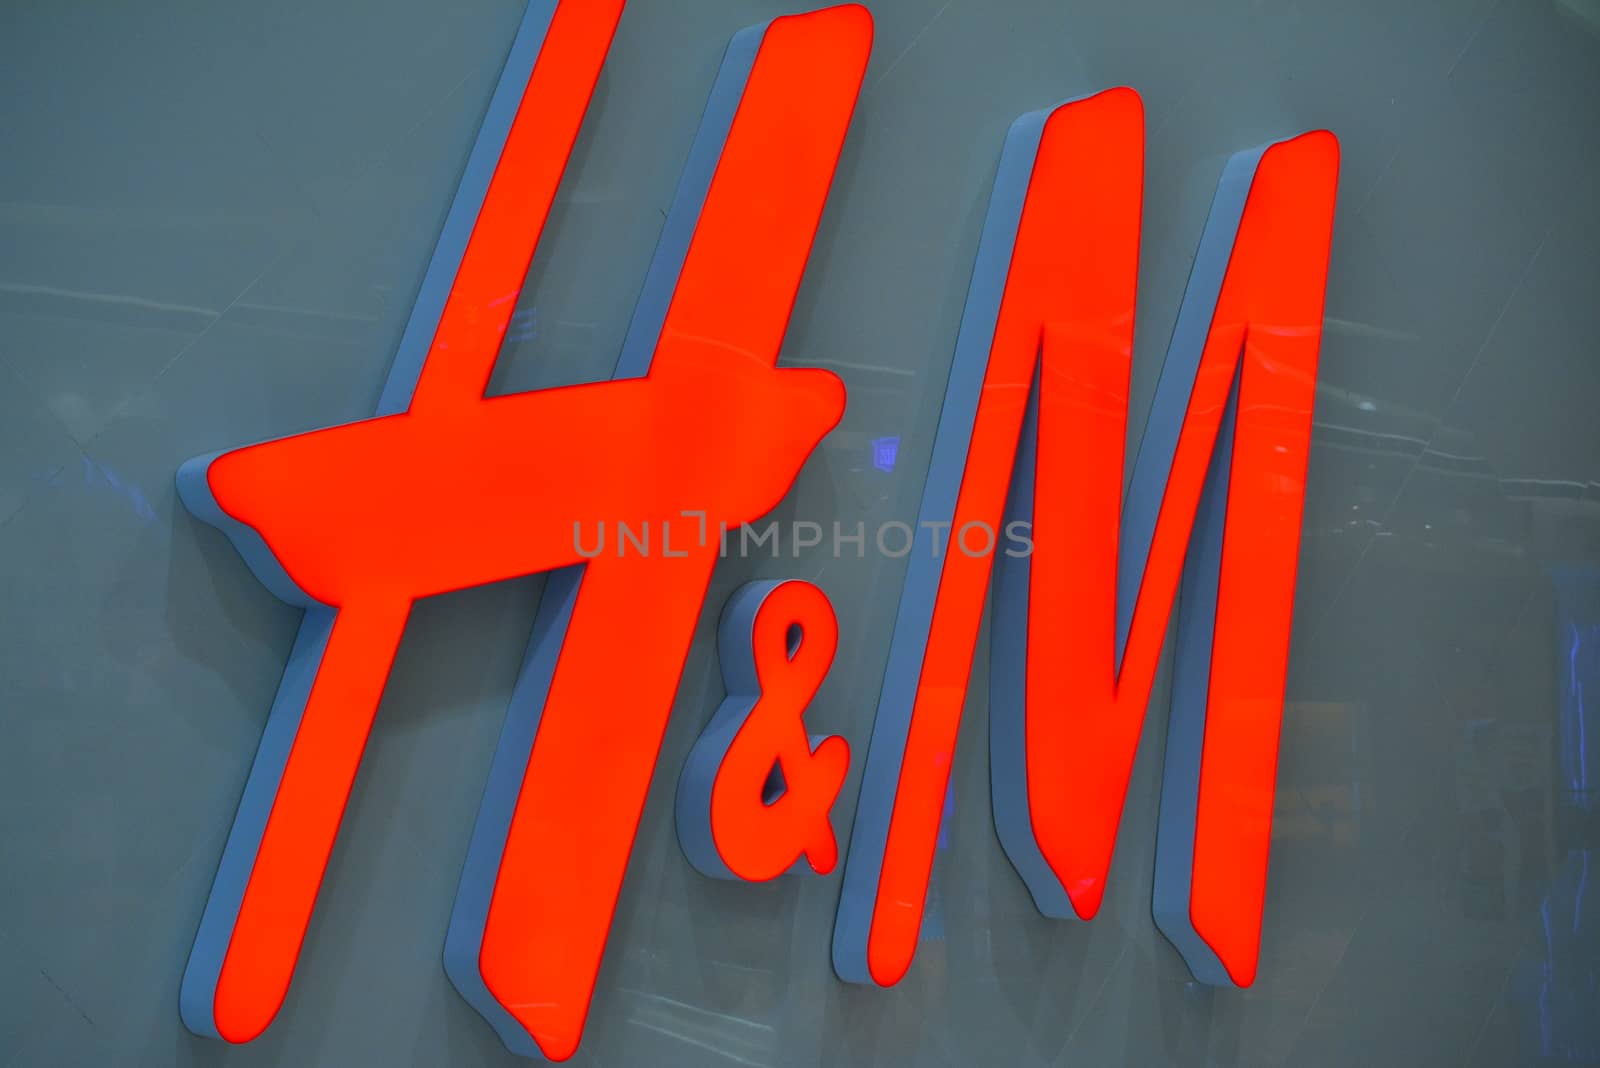 H and M logo signage in Cebu, Philippines by imwaltersy